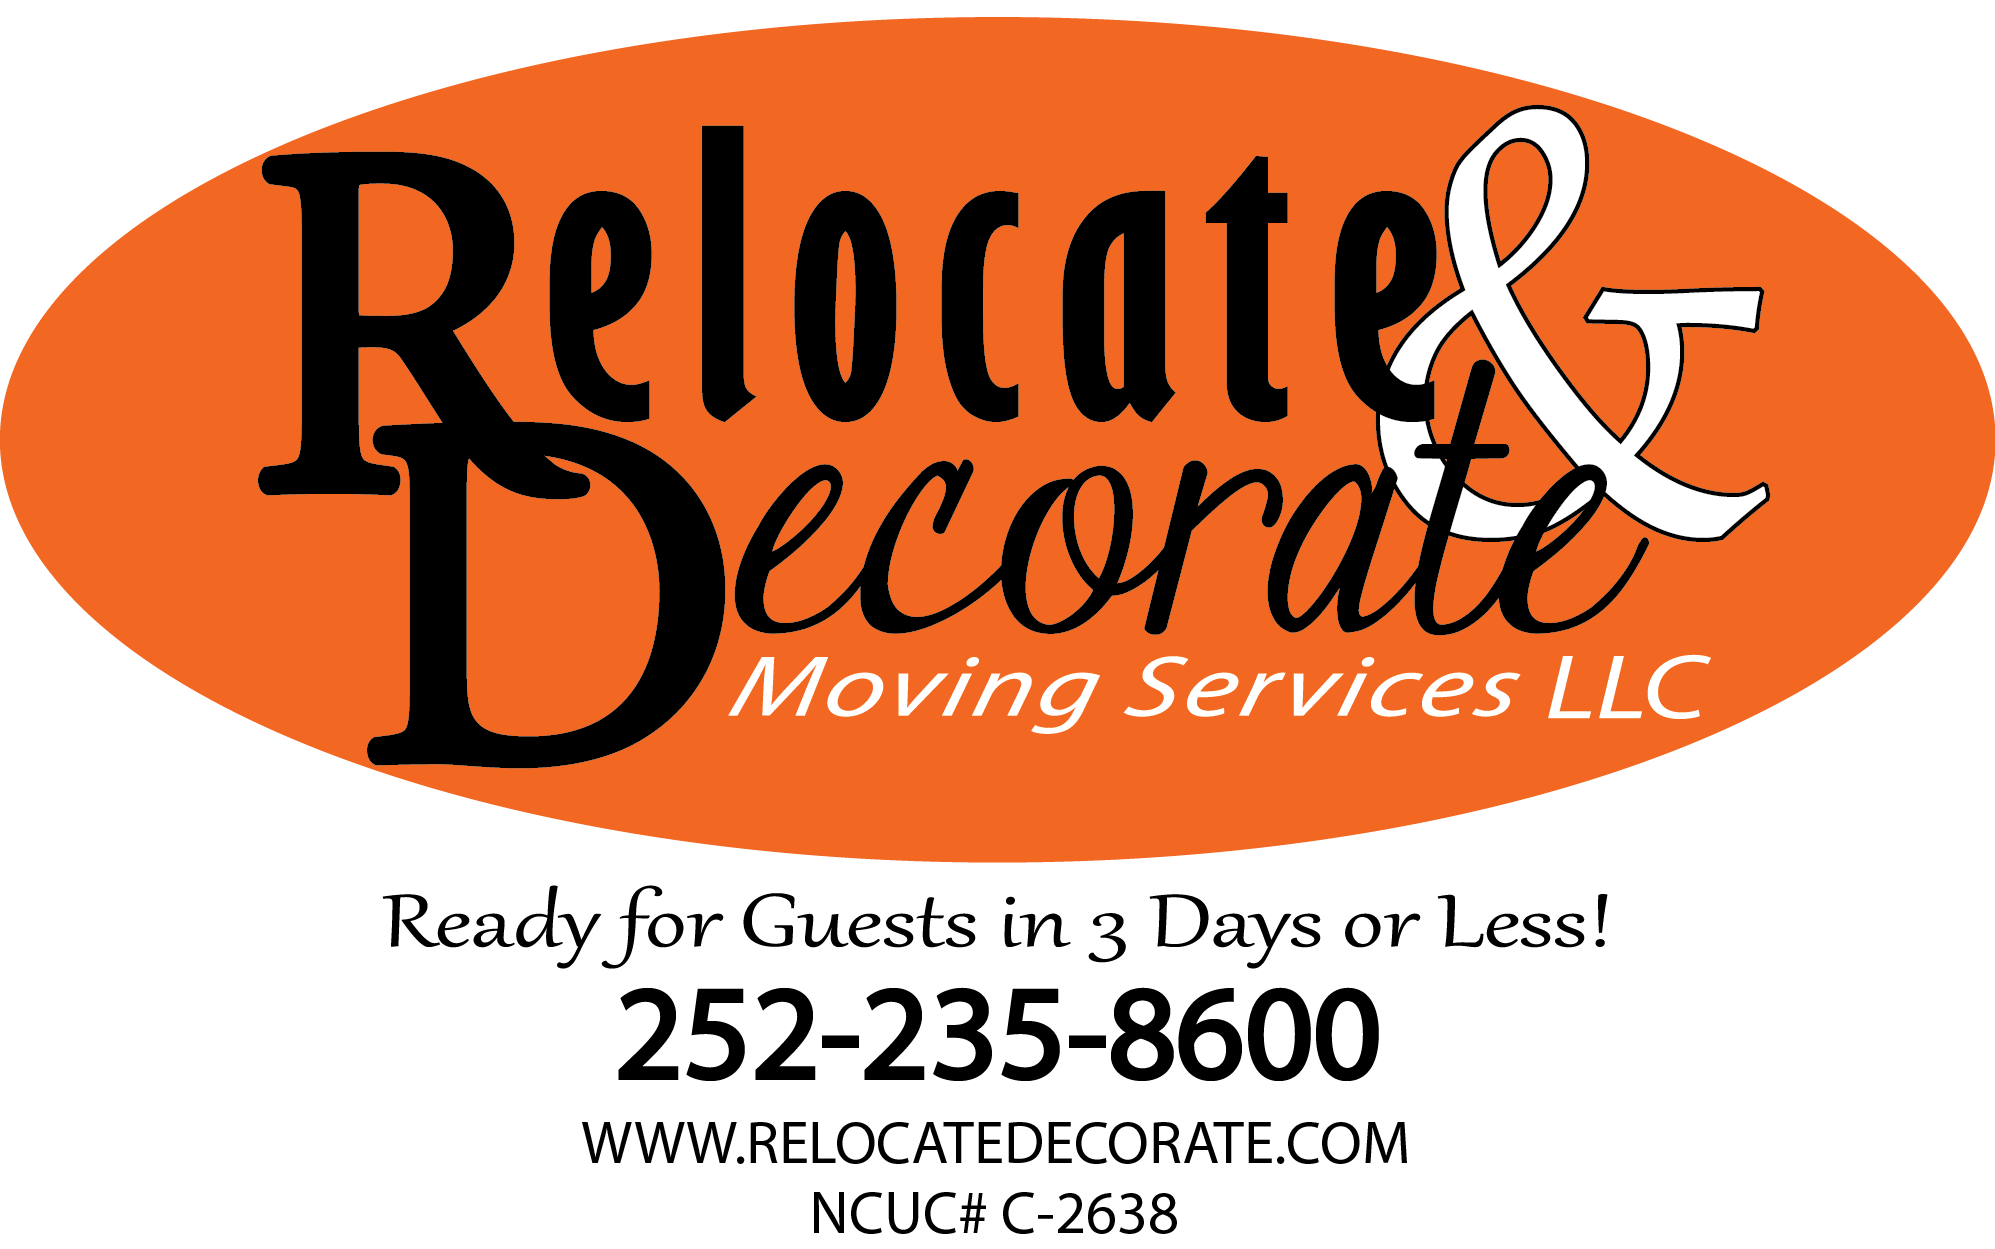 Relocate & Decorate Moving Services, LLC Logo